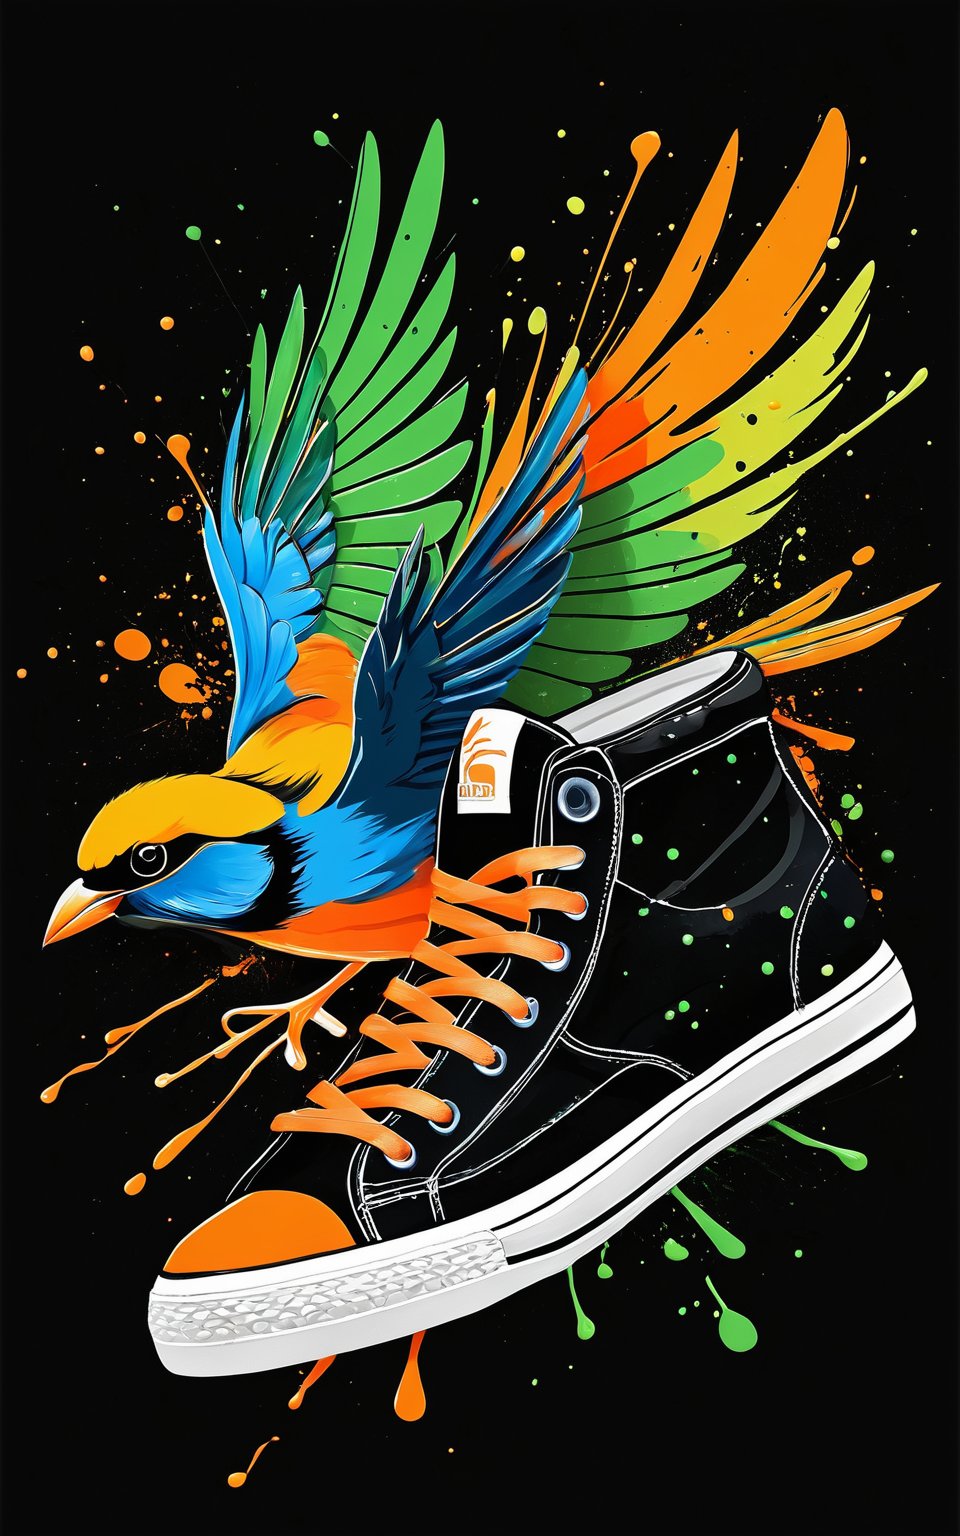 (Artistic bird illustration, high resolution, painted style, colored paint splatters), a [sneakers] depicted in a painted style with dynamic and vibrant paint splatters. The main colors are [orange] and [green], set against a [black] background. The artwork captures the lively essence of the [sneakers] through the use of bold paint splatters, creating a visually striking and energetic composition.